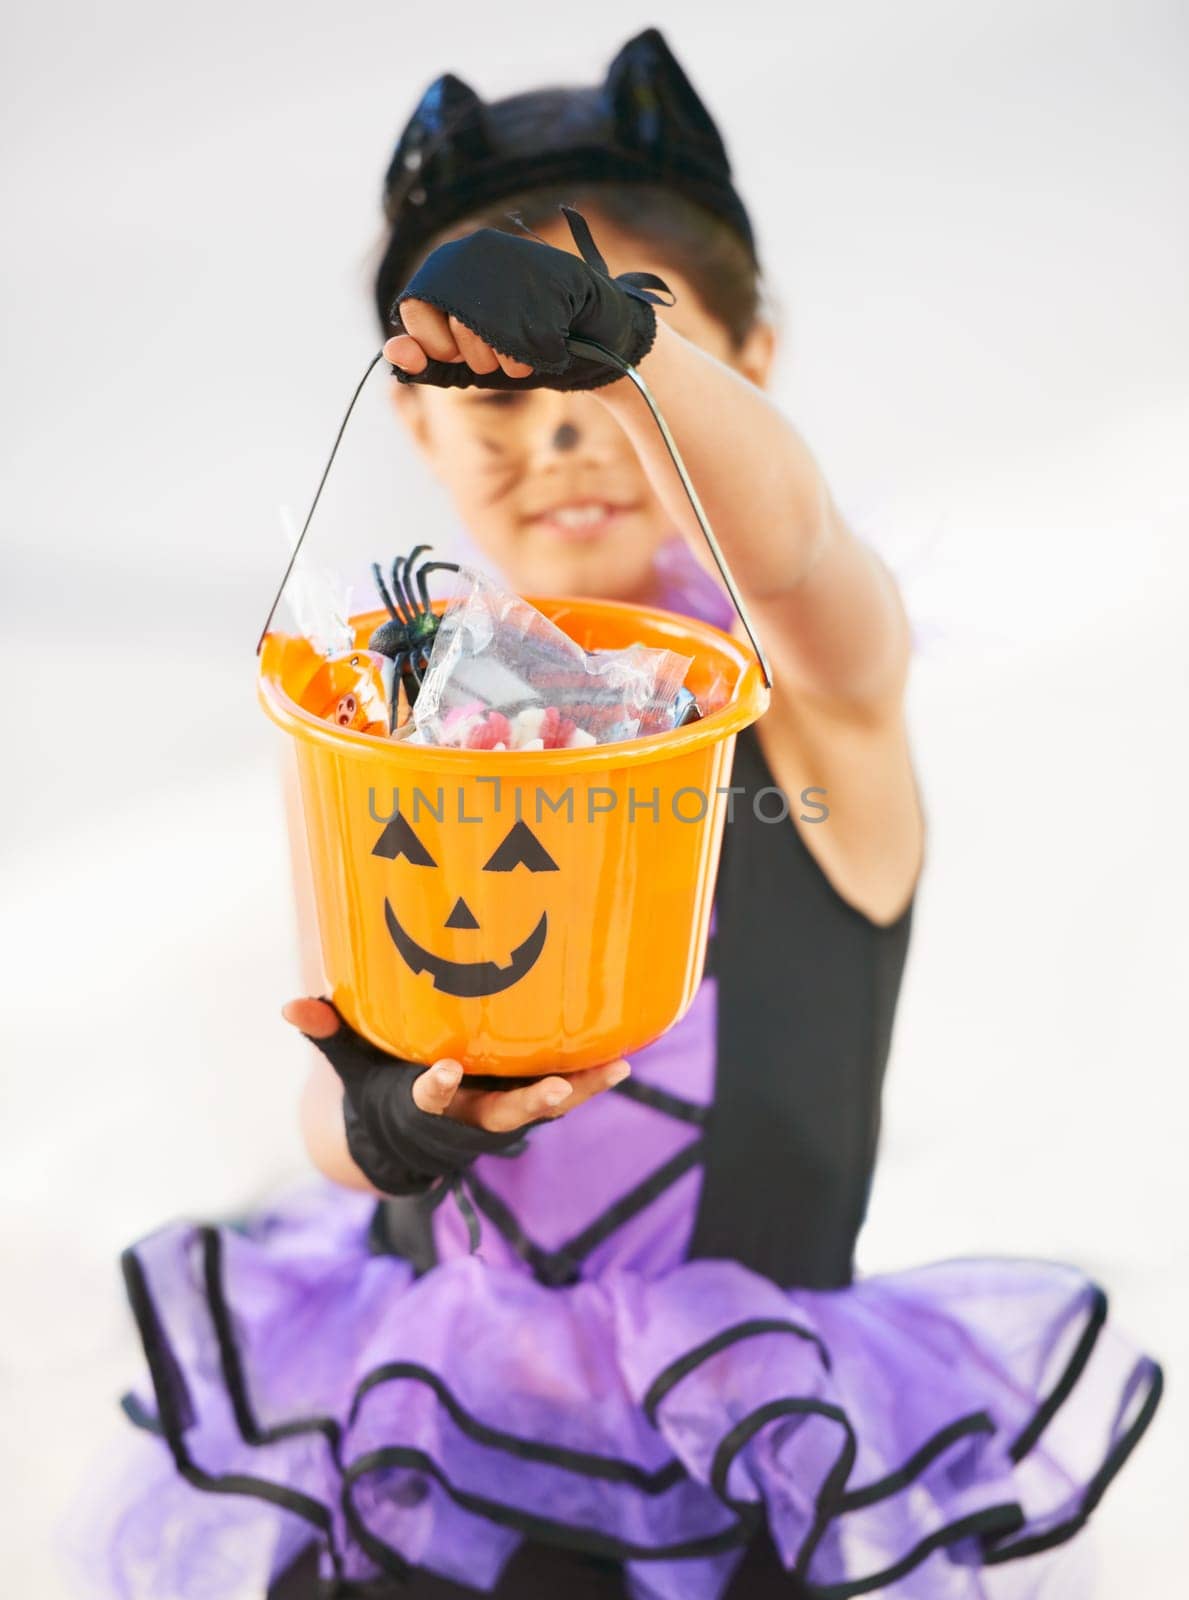 Look at all Ive got. Little girl dressed in a Halloween costume holding a candy bucket